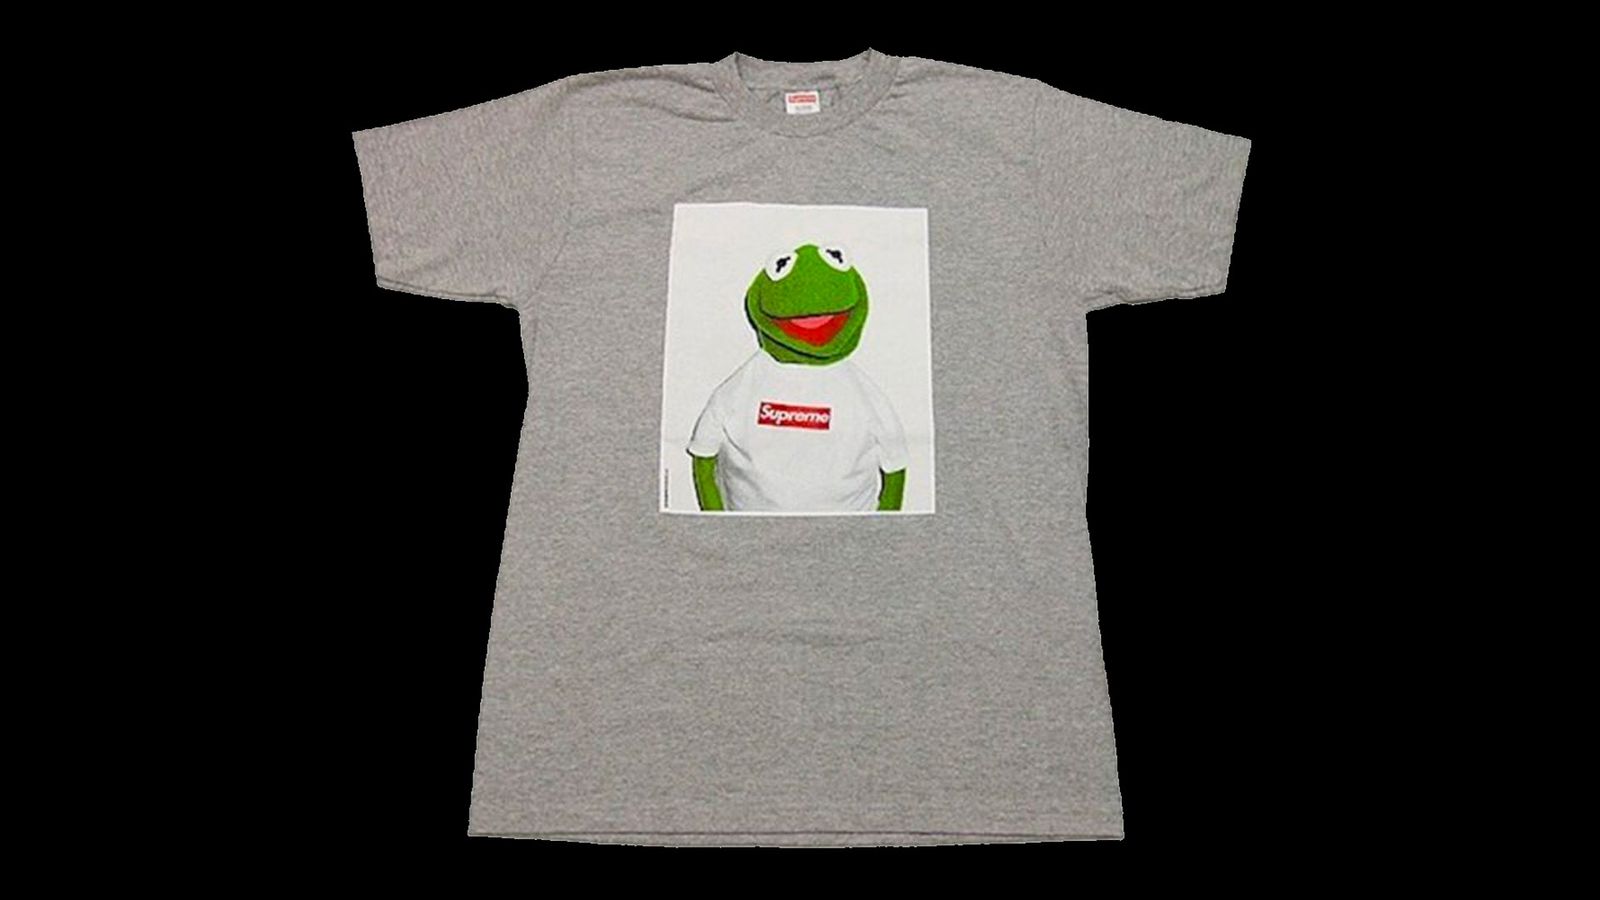 Supreme Kermit Tee product image of a grey t-shirt with Kermit pictured in the centre wearing an original Supreme box logo tee.